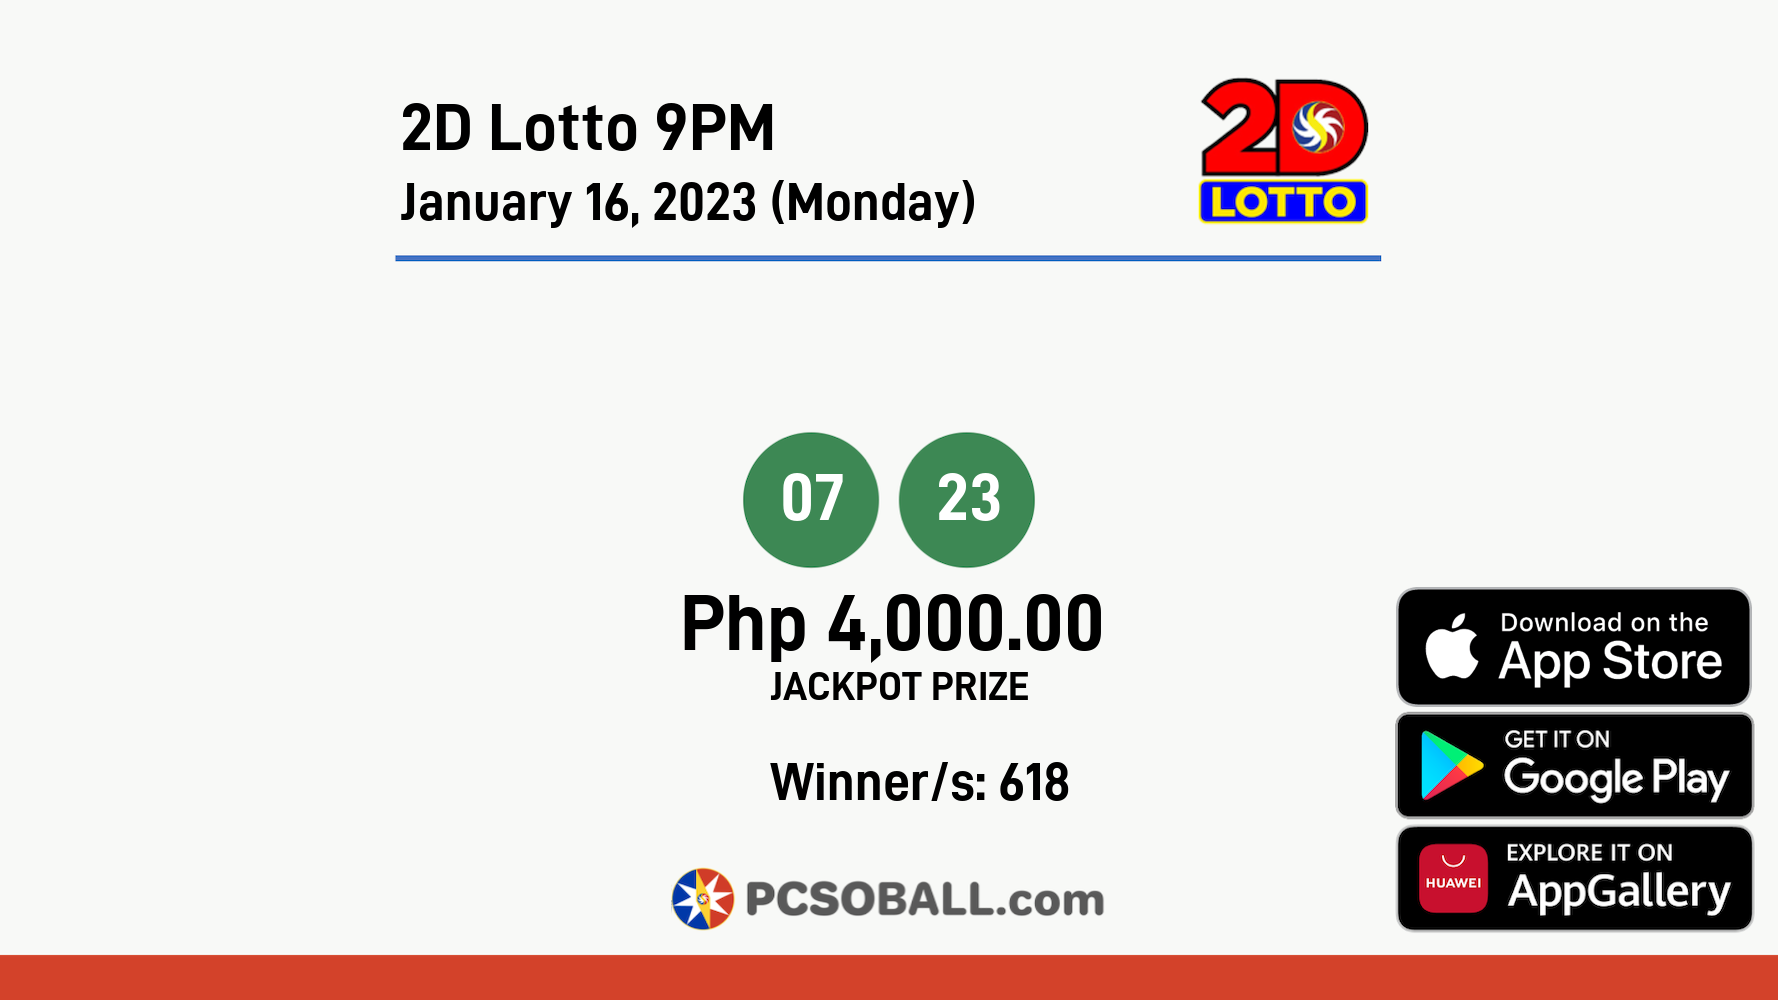 2D Lotto 9PM January 16, 2023 (Monday) Result